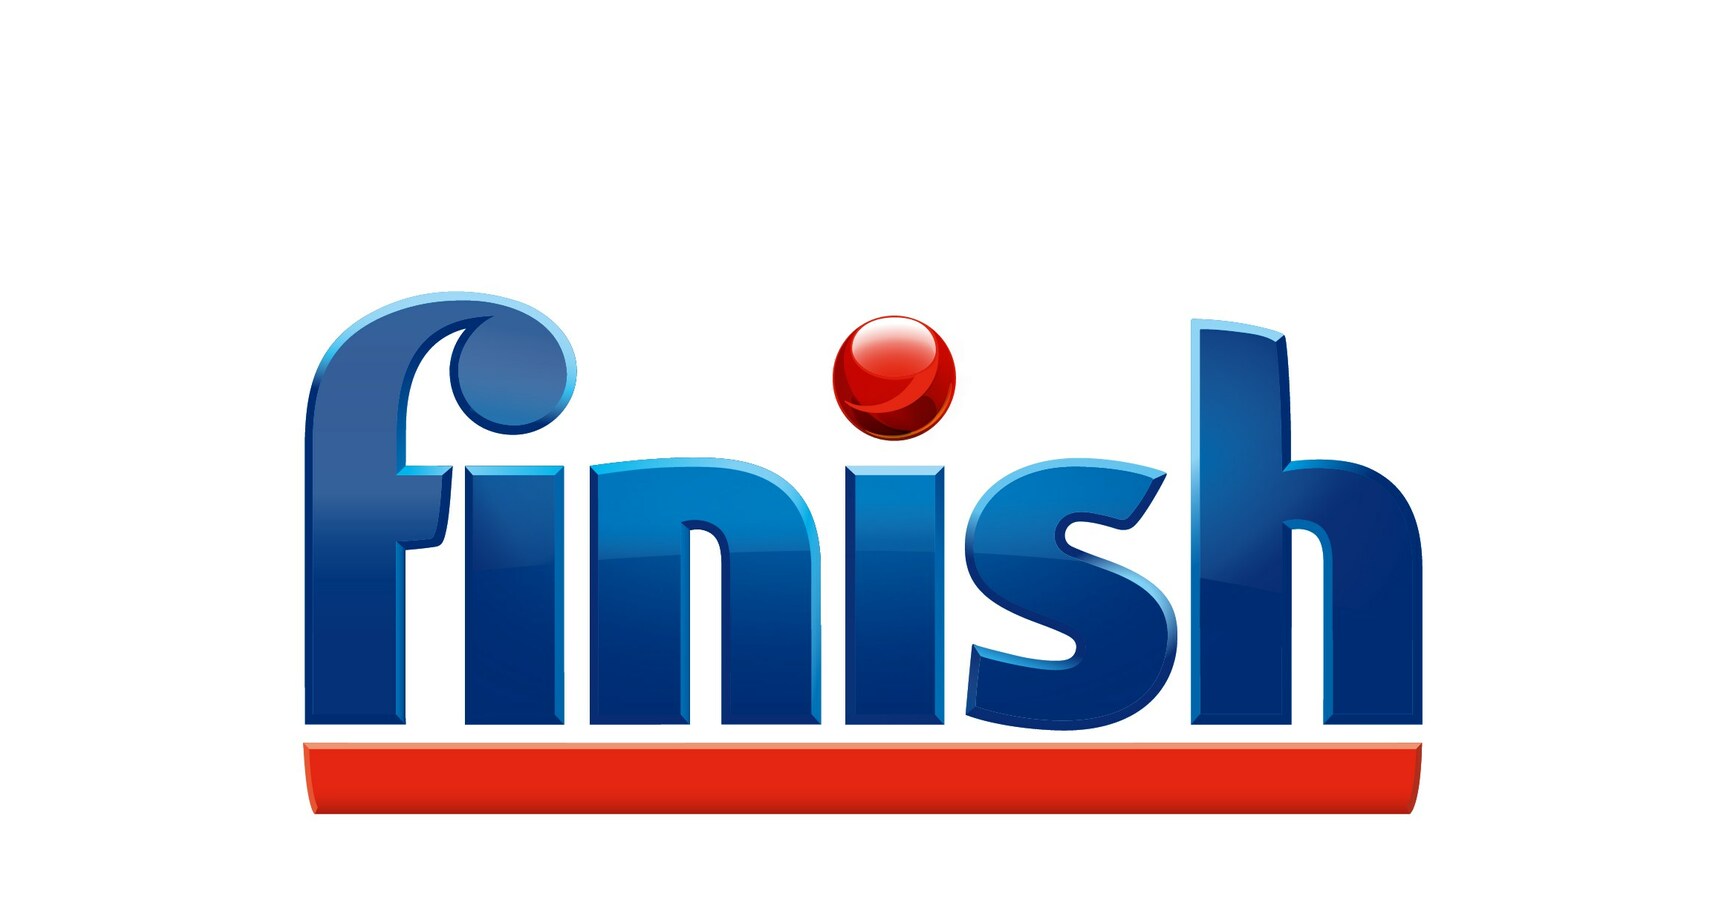 Finish® Creates the First Monument Meant to Never Be Seen